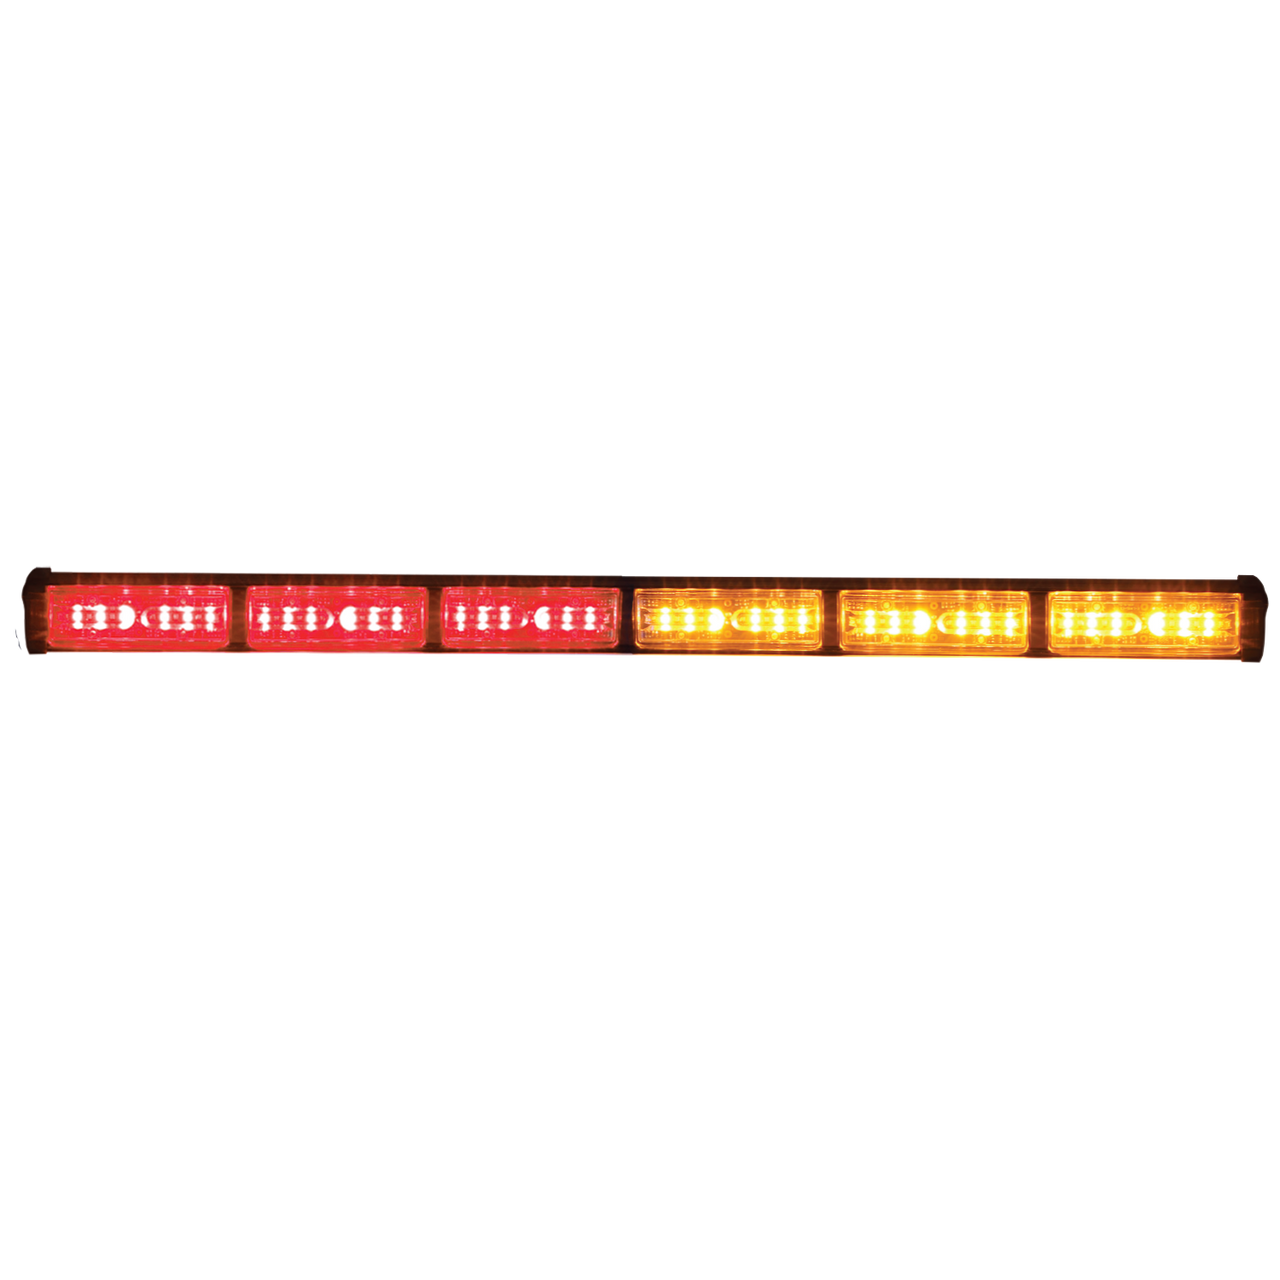 Code-3 - MEGATHIN STIK SERIES - 6 light heads, Waterproof, Single or Dual Color, Can be used an an Arrow Stick, 24.6 Inch Light, 16 Inch Cable with waterproof connector